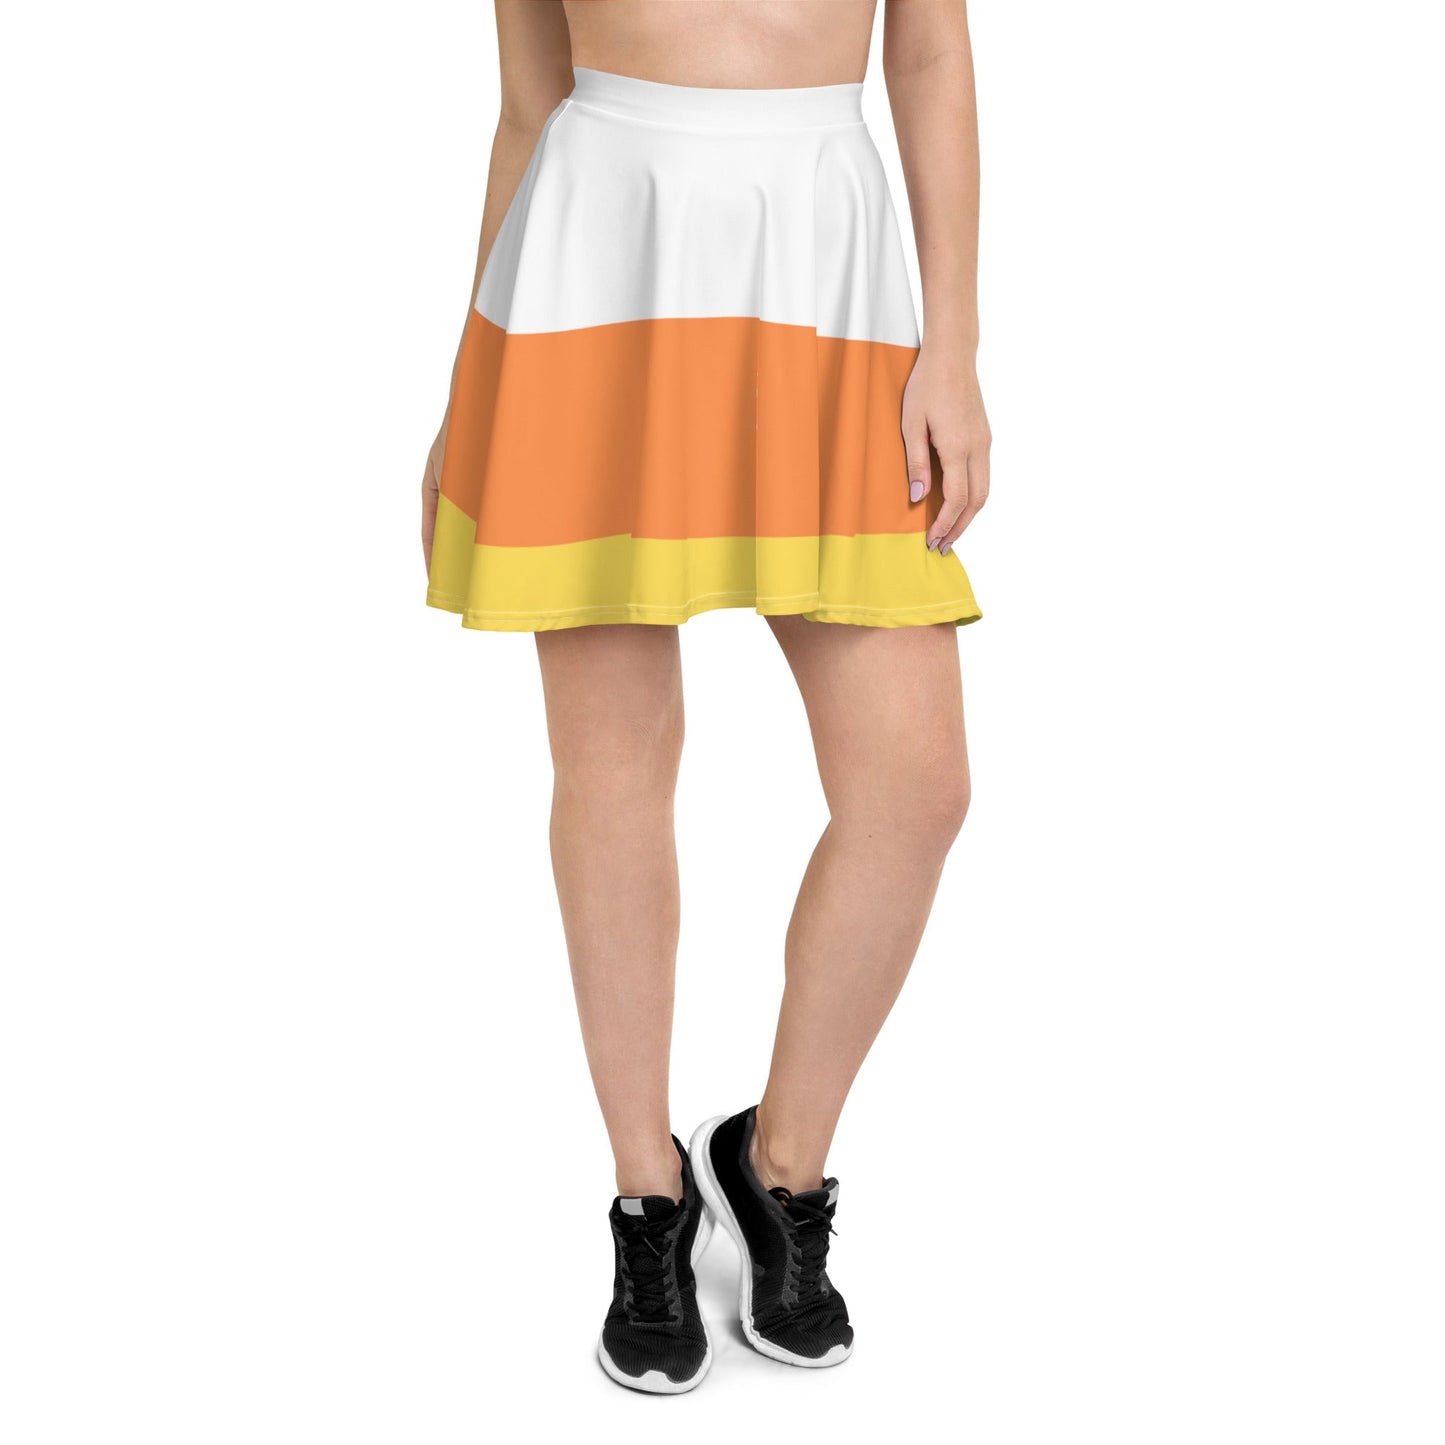 Candy Corn Skater Skirt boo to youboundingcandy corn#tag4##tag5##tag6#